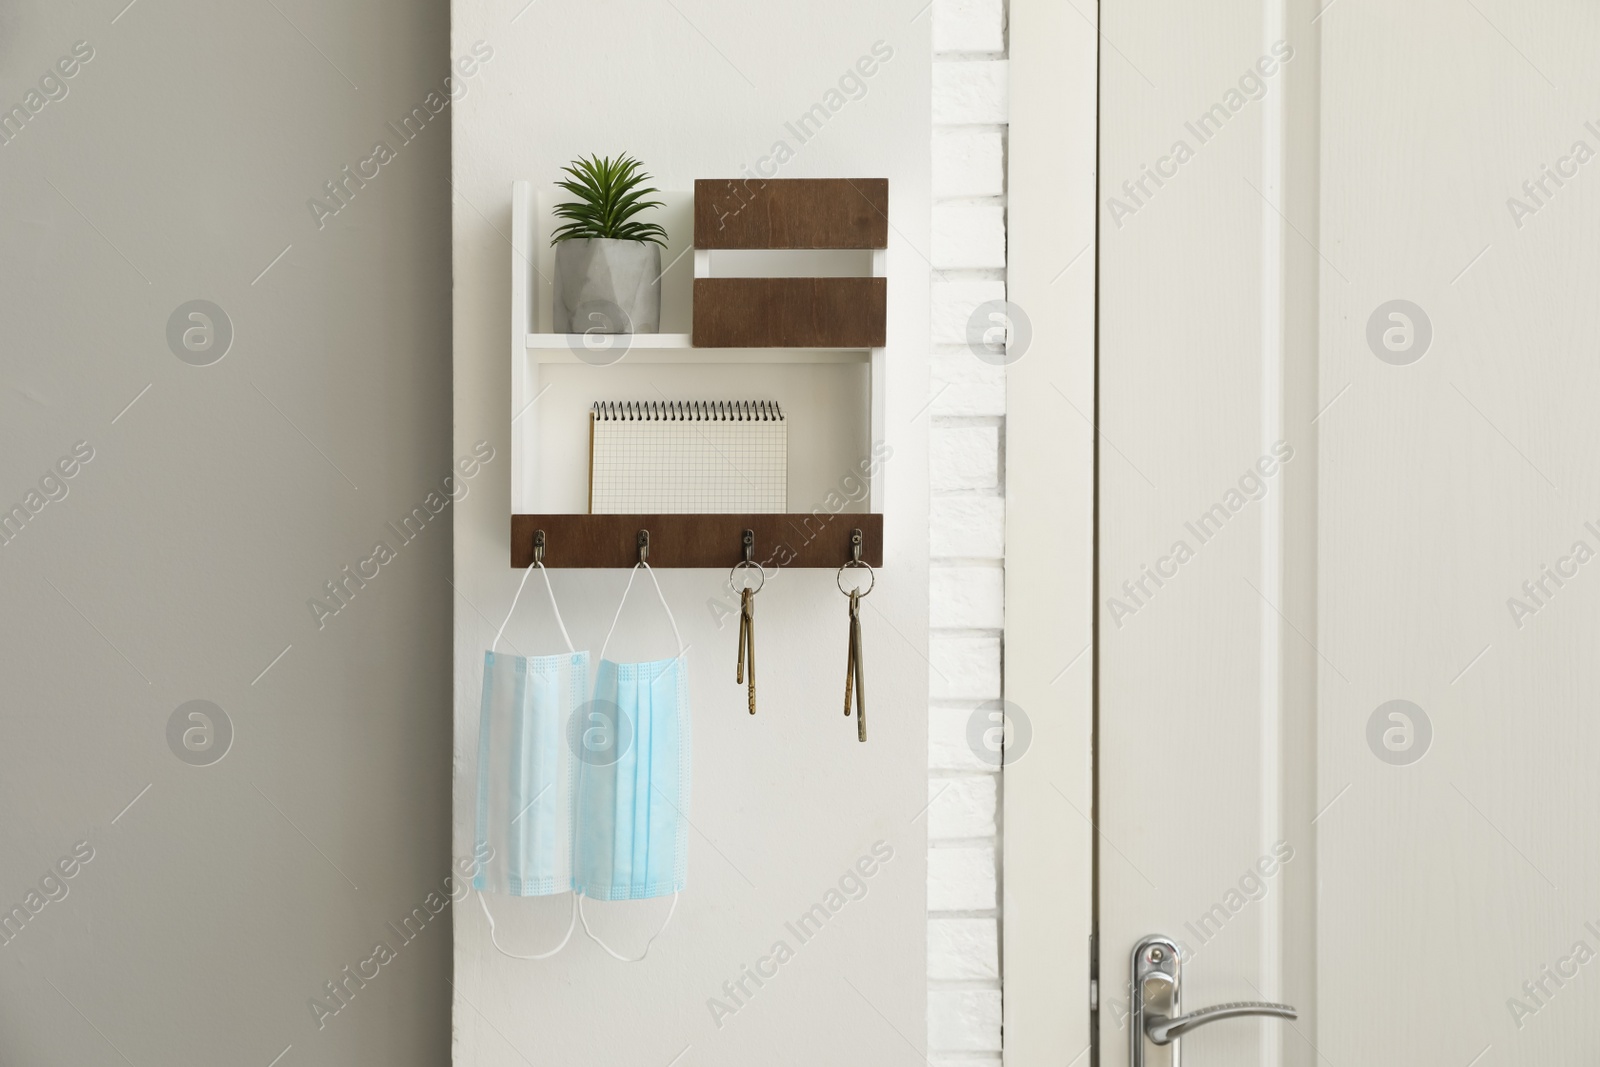 Photo of Hanger for keys with protective masks, houseplant and notebook on shelves near door in hallway